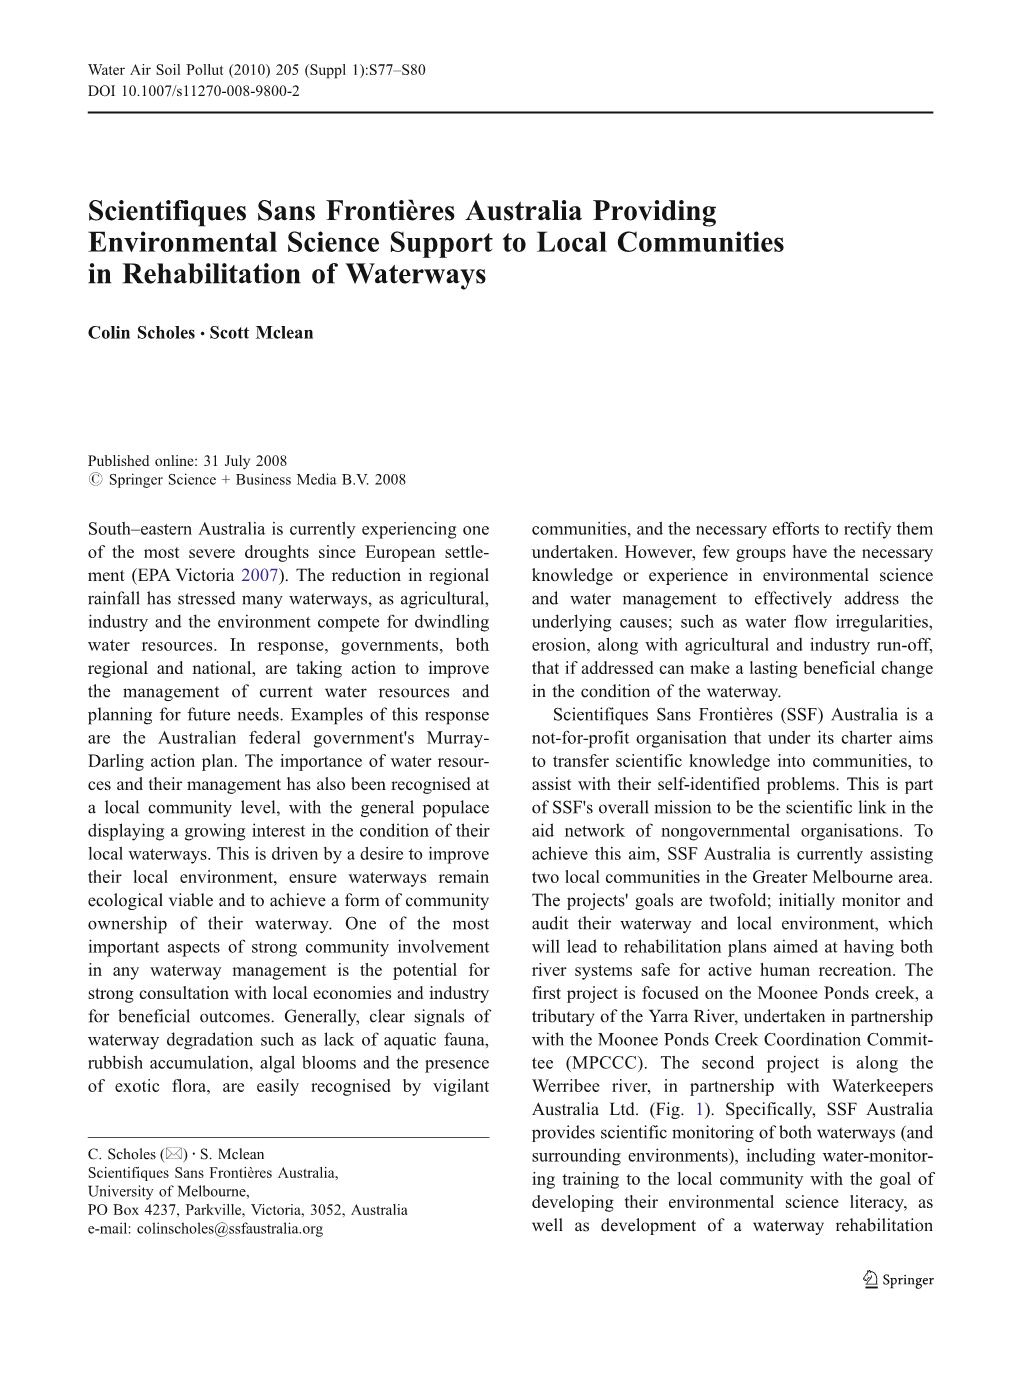 Scientifiques Sans Frontières Australia Providing Environmental Science Support to Local Communities in Rehabilitation of Waterways